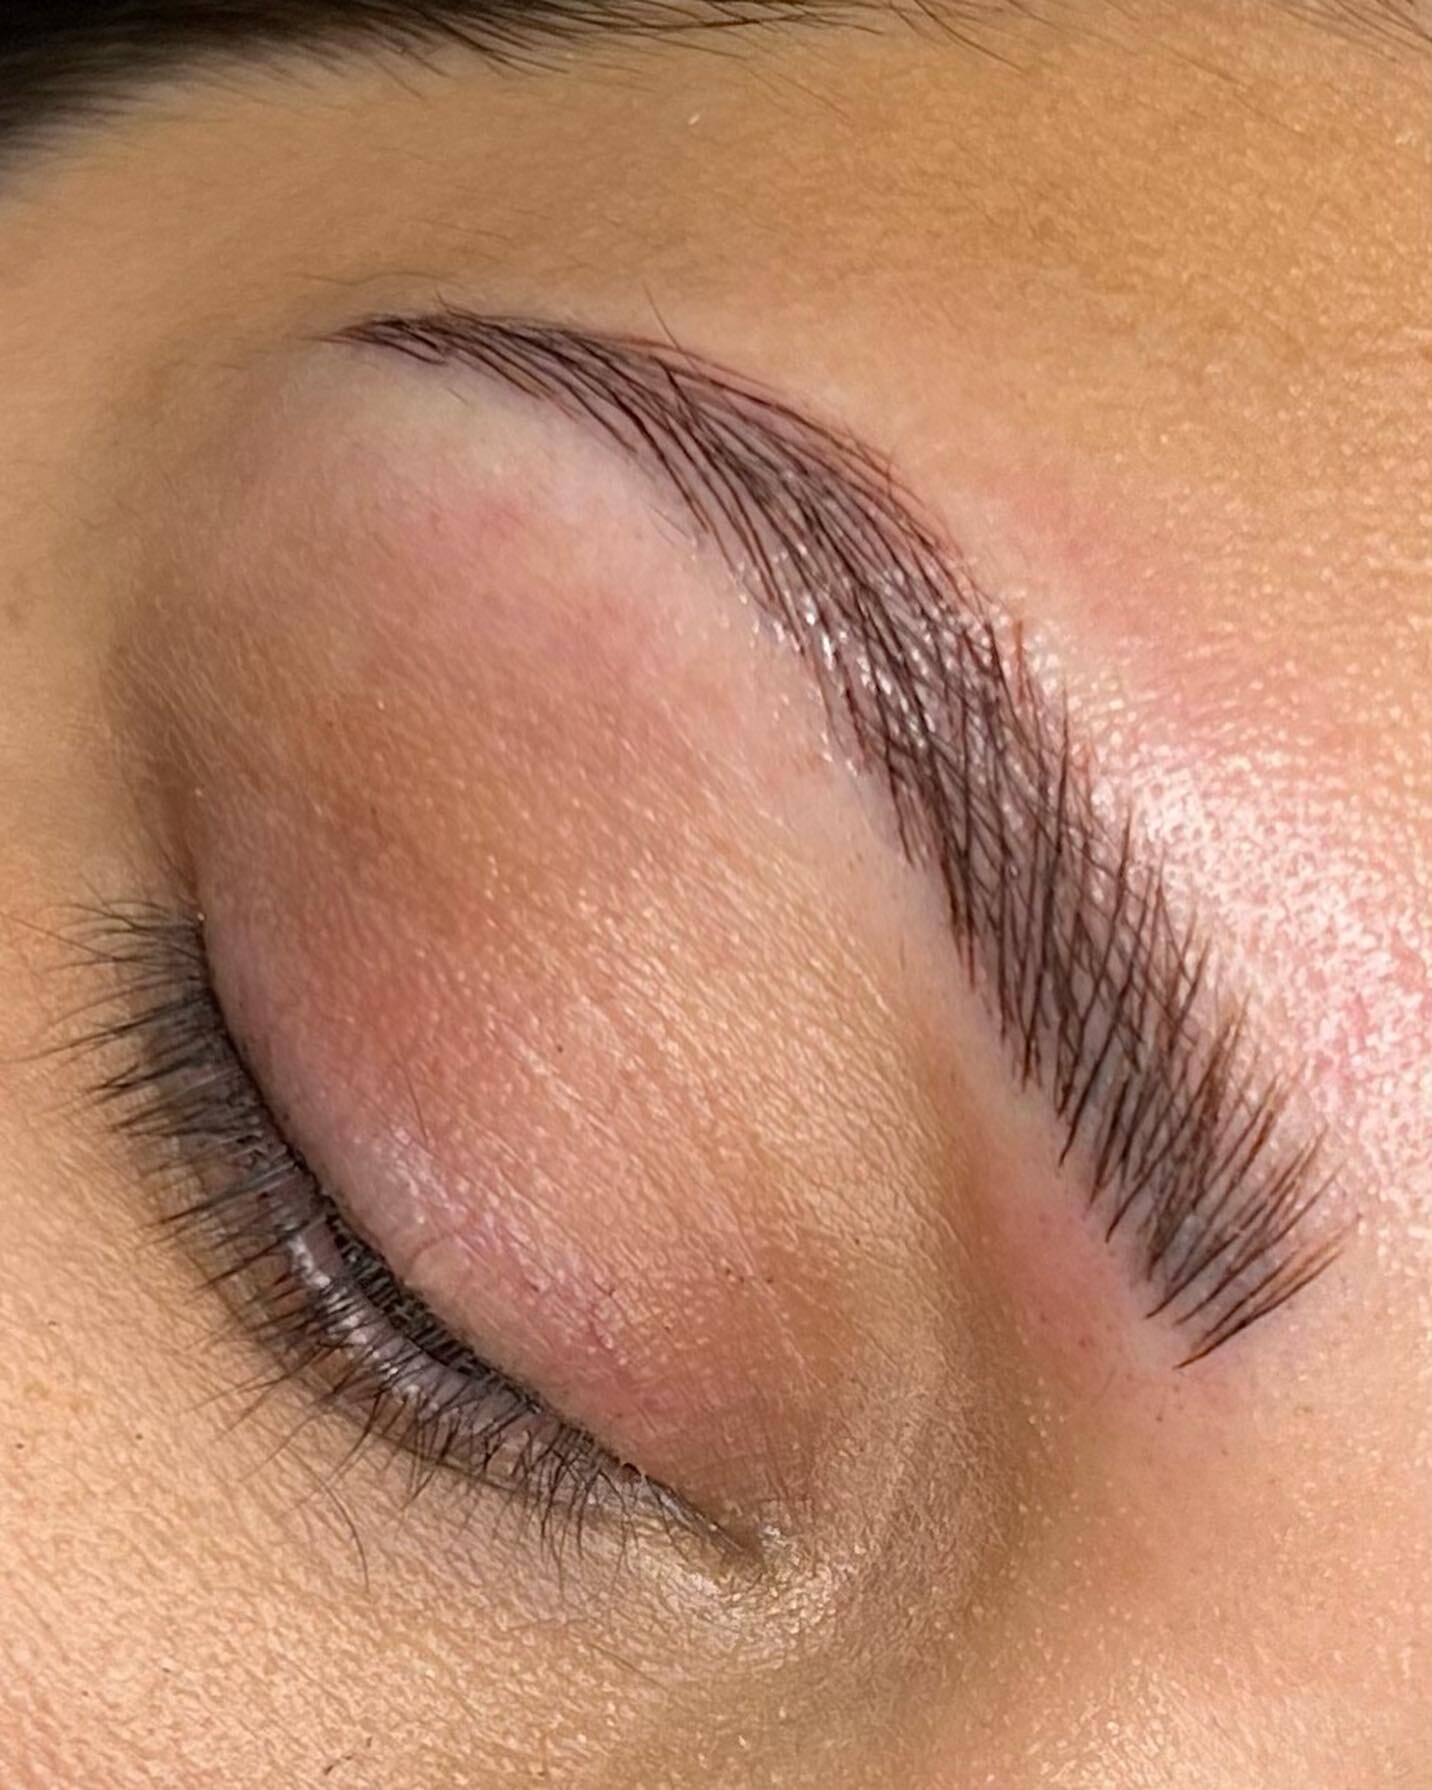 Microblading offers convenience and long-lasting effects. It eliminates the need for daily eyebrow makeup application and touch-ups. With proper care, the results can last for around one to three years, reducing the hassle of maintaining perfectly sh